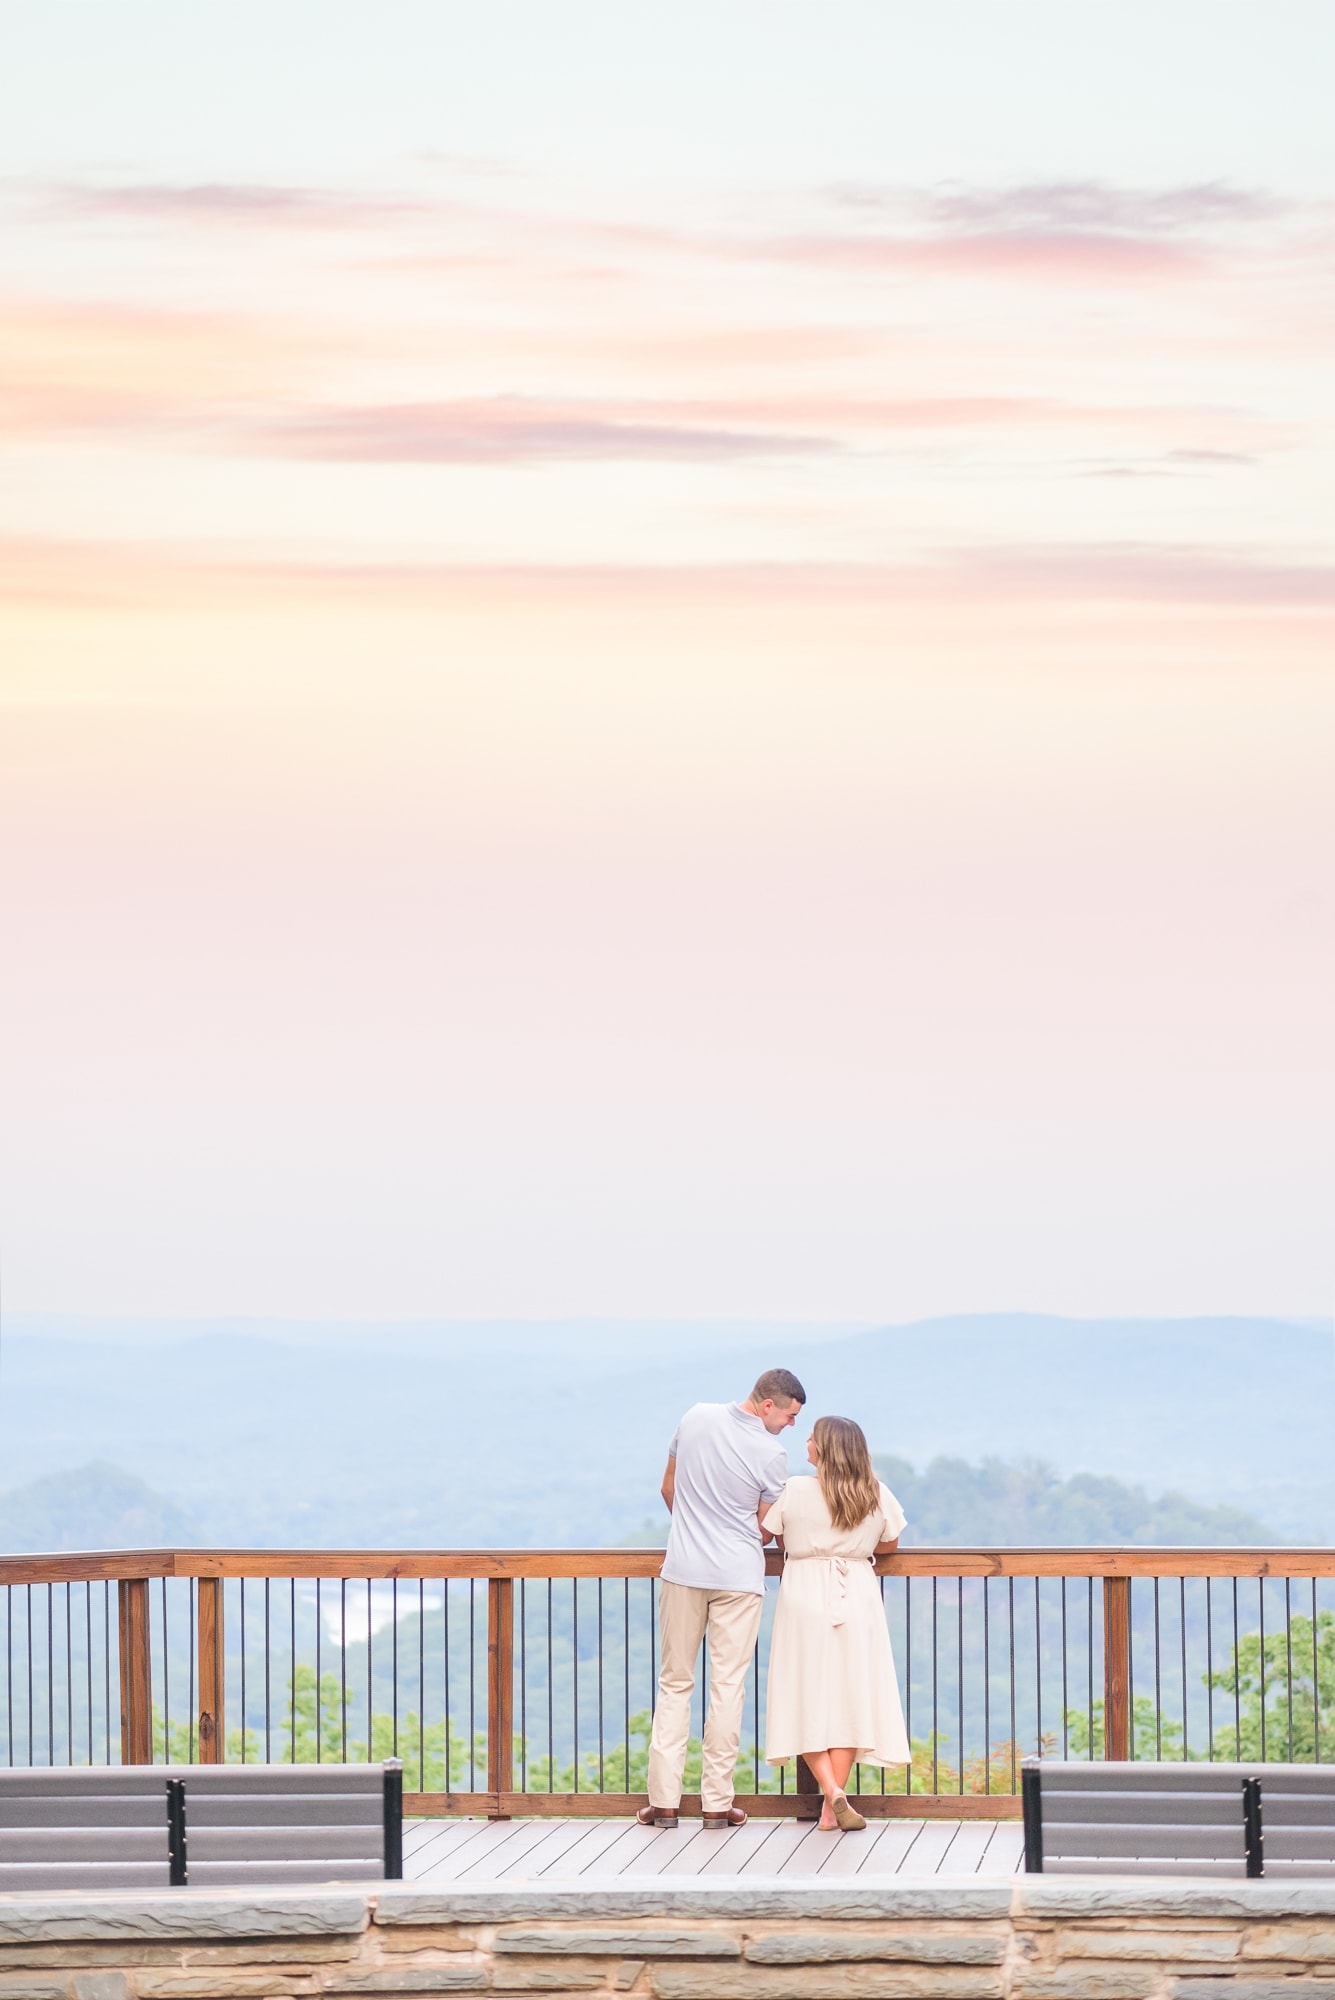 One of North Carolina's most beautiful mountain views can be found at Morrow Mountain, the perfect backdrop for engagement photos.